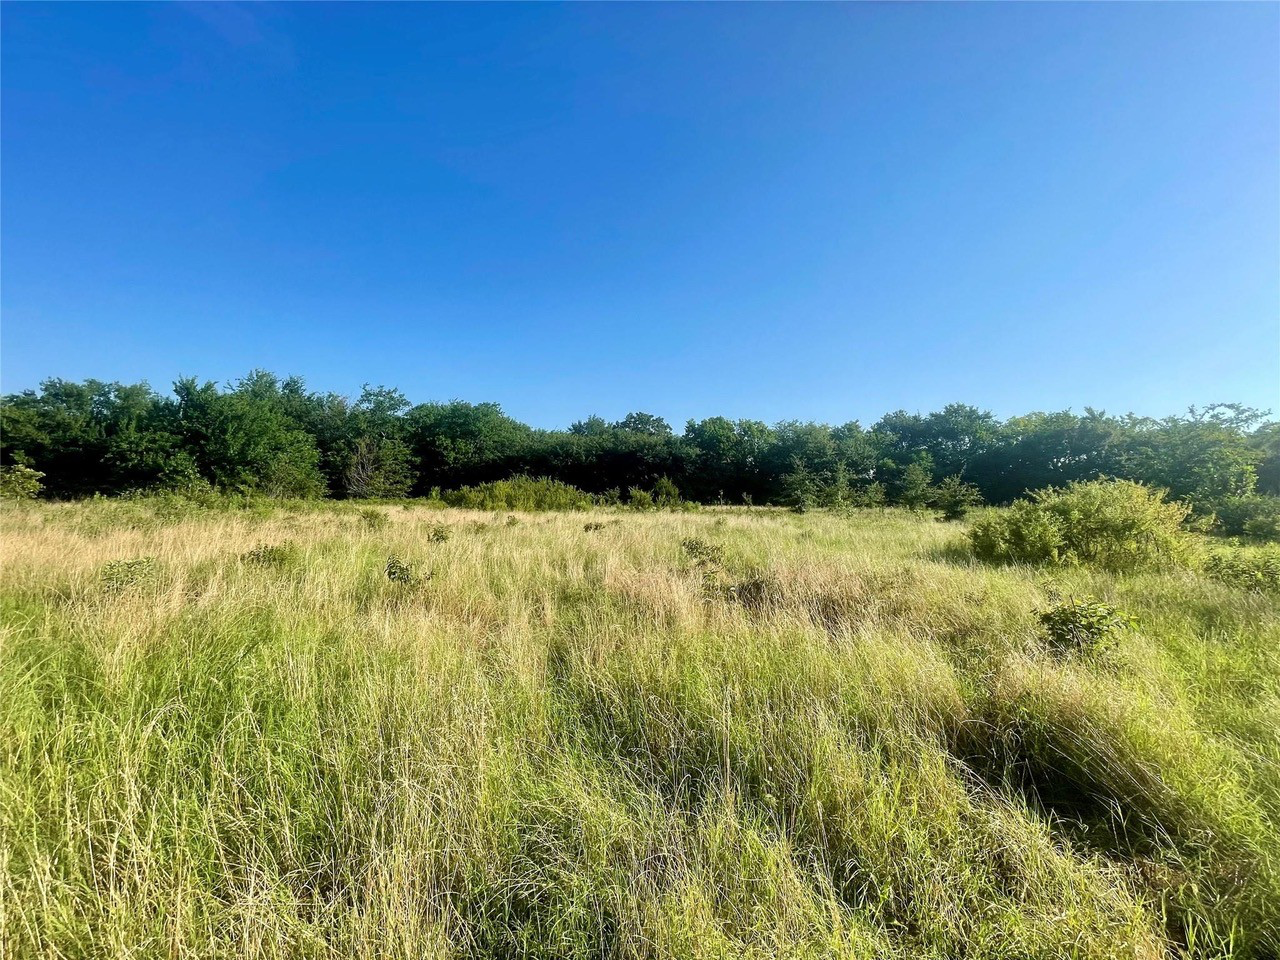 Two 10-Acre Tracts in Southern Hopkins County Are Now For Sale